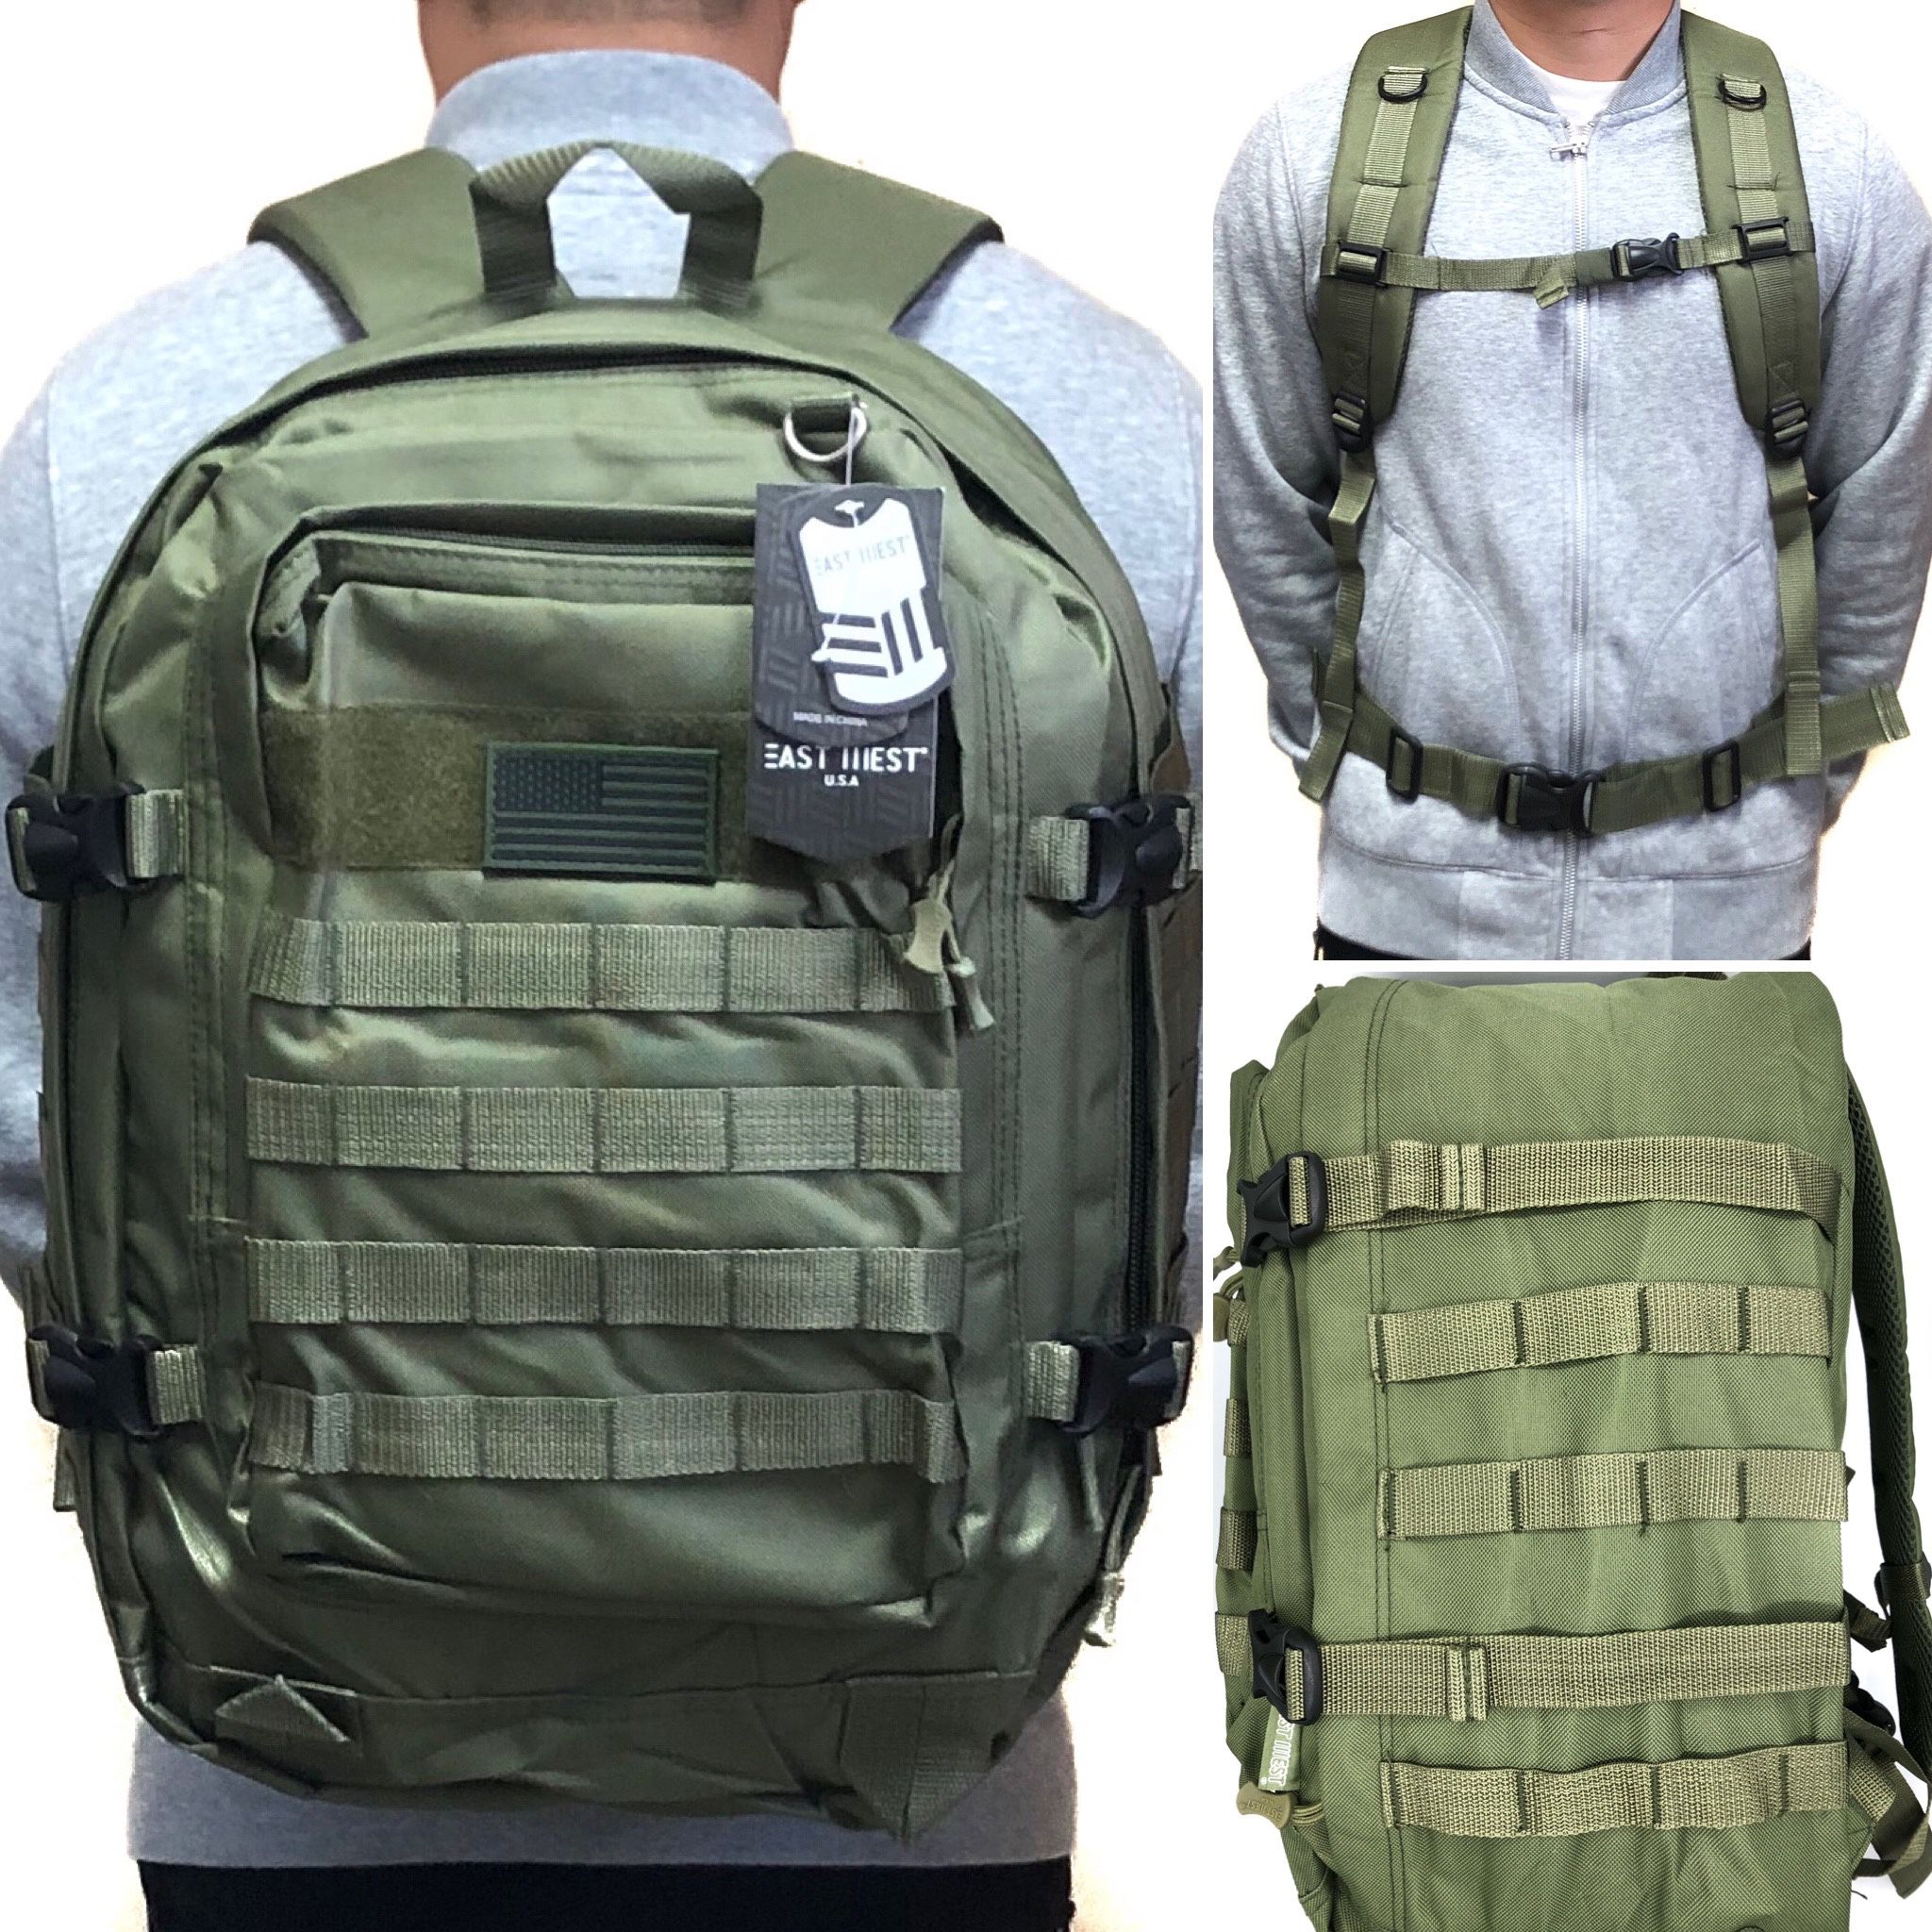 Brand NEW! Large Olive Green OD tactical military style Backpack molle system hiking gym work camping travel bag